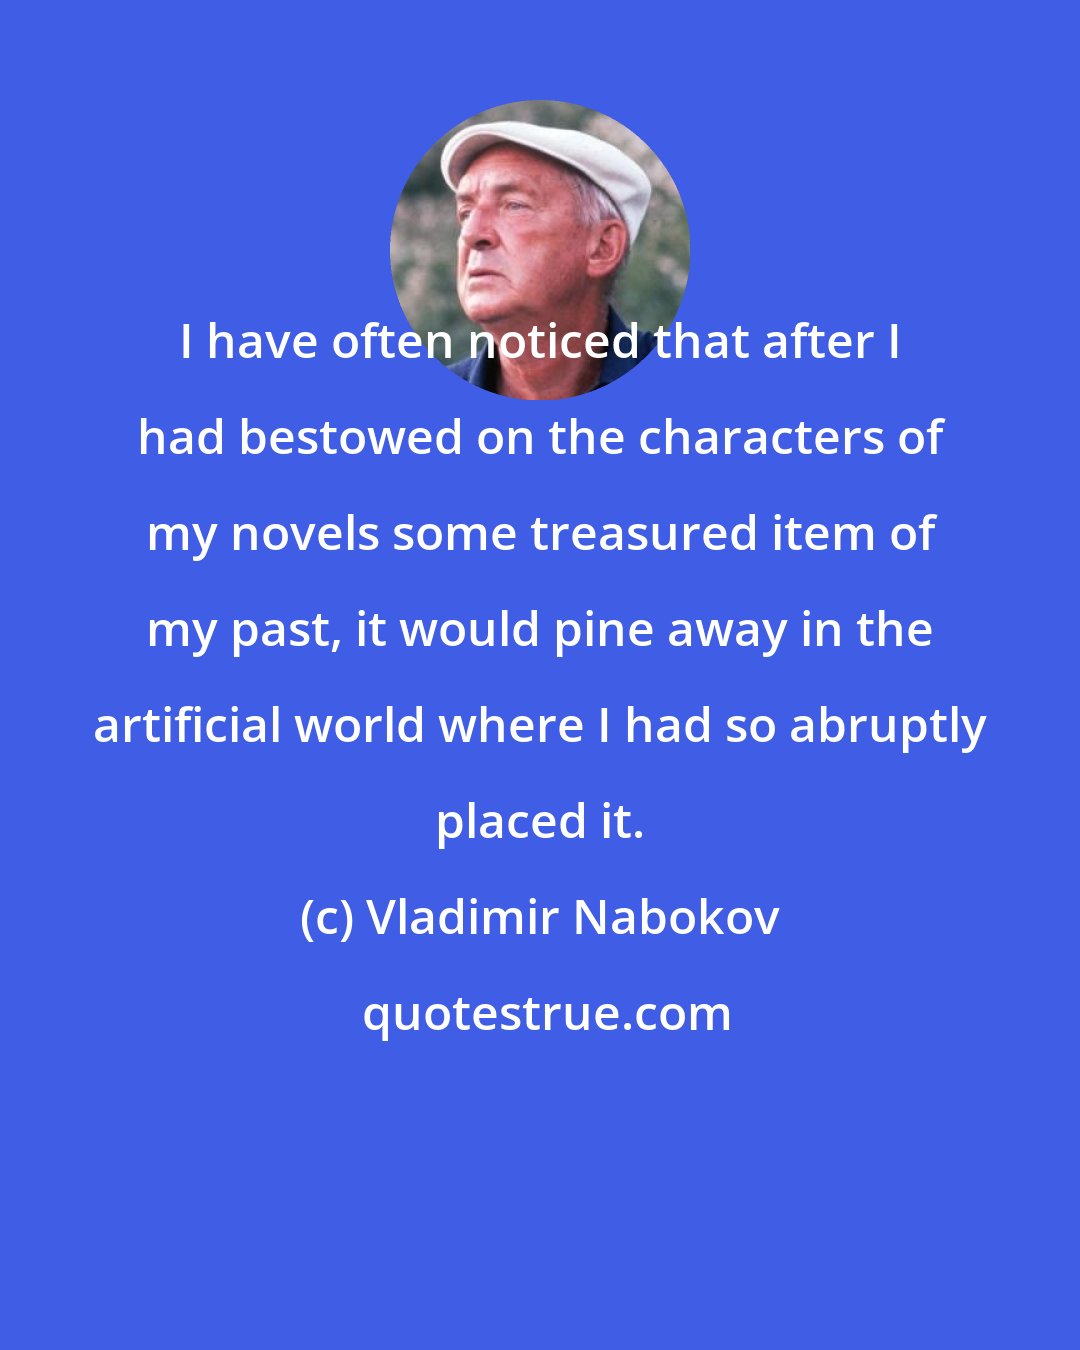 Vladimir Nabokov: I have often noticed that after I had bestowed on the characters of my novels some treasured item of my past, it would pine away in the artificial world where I had so abruptly placed it.